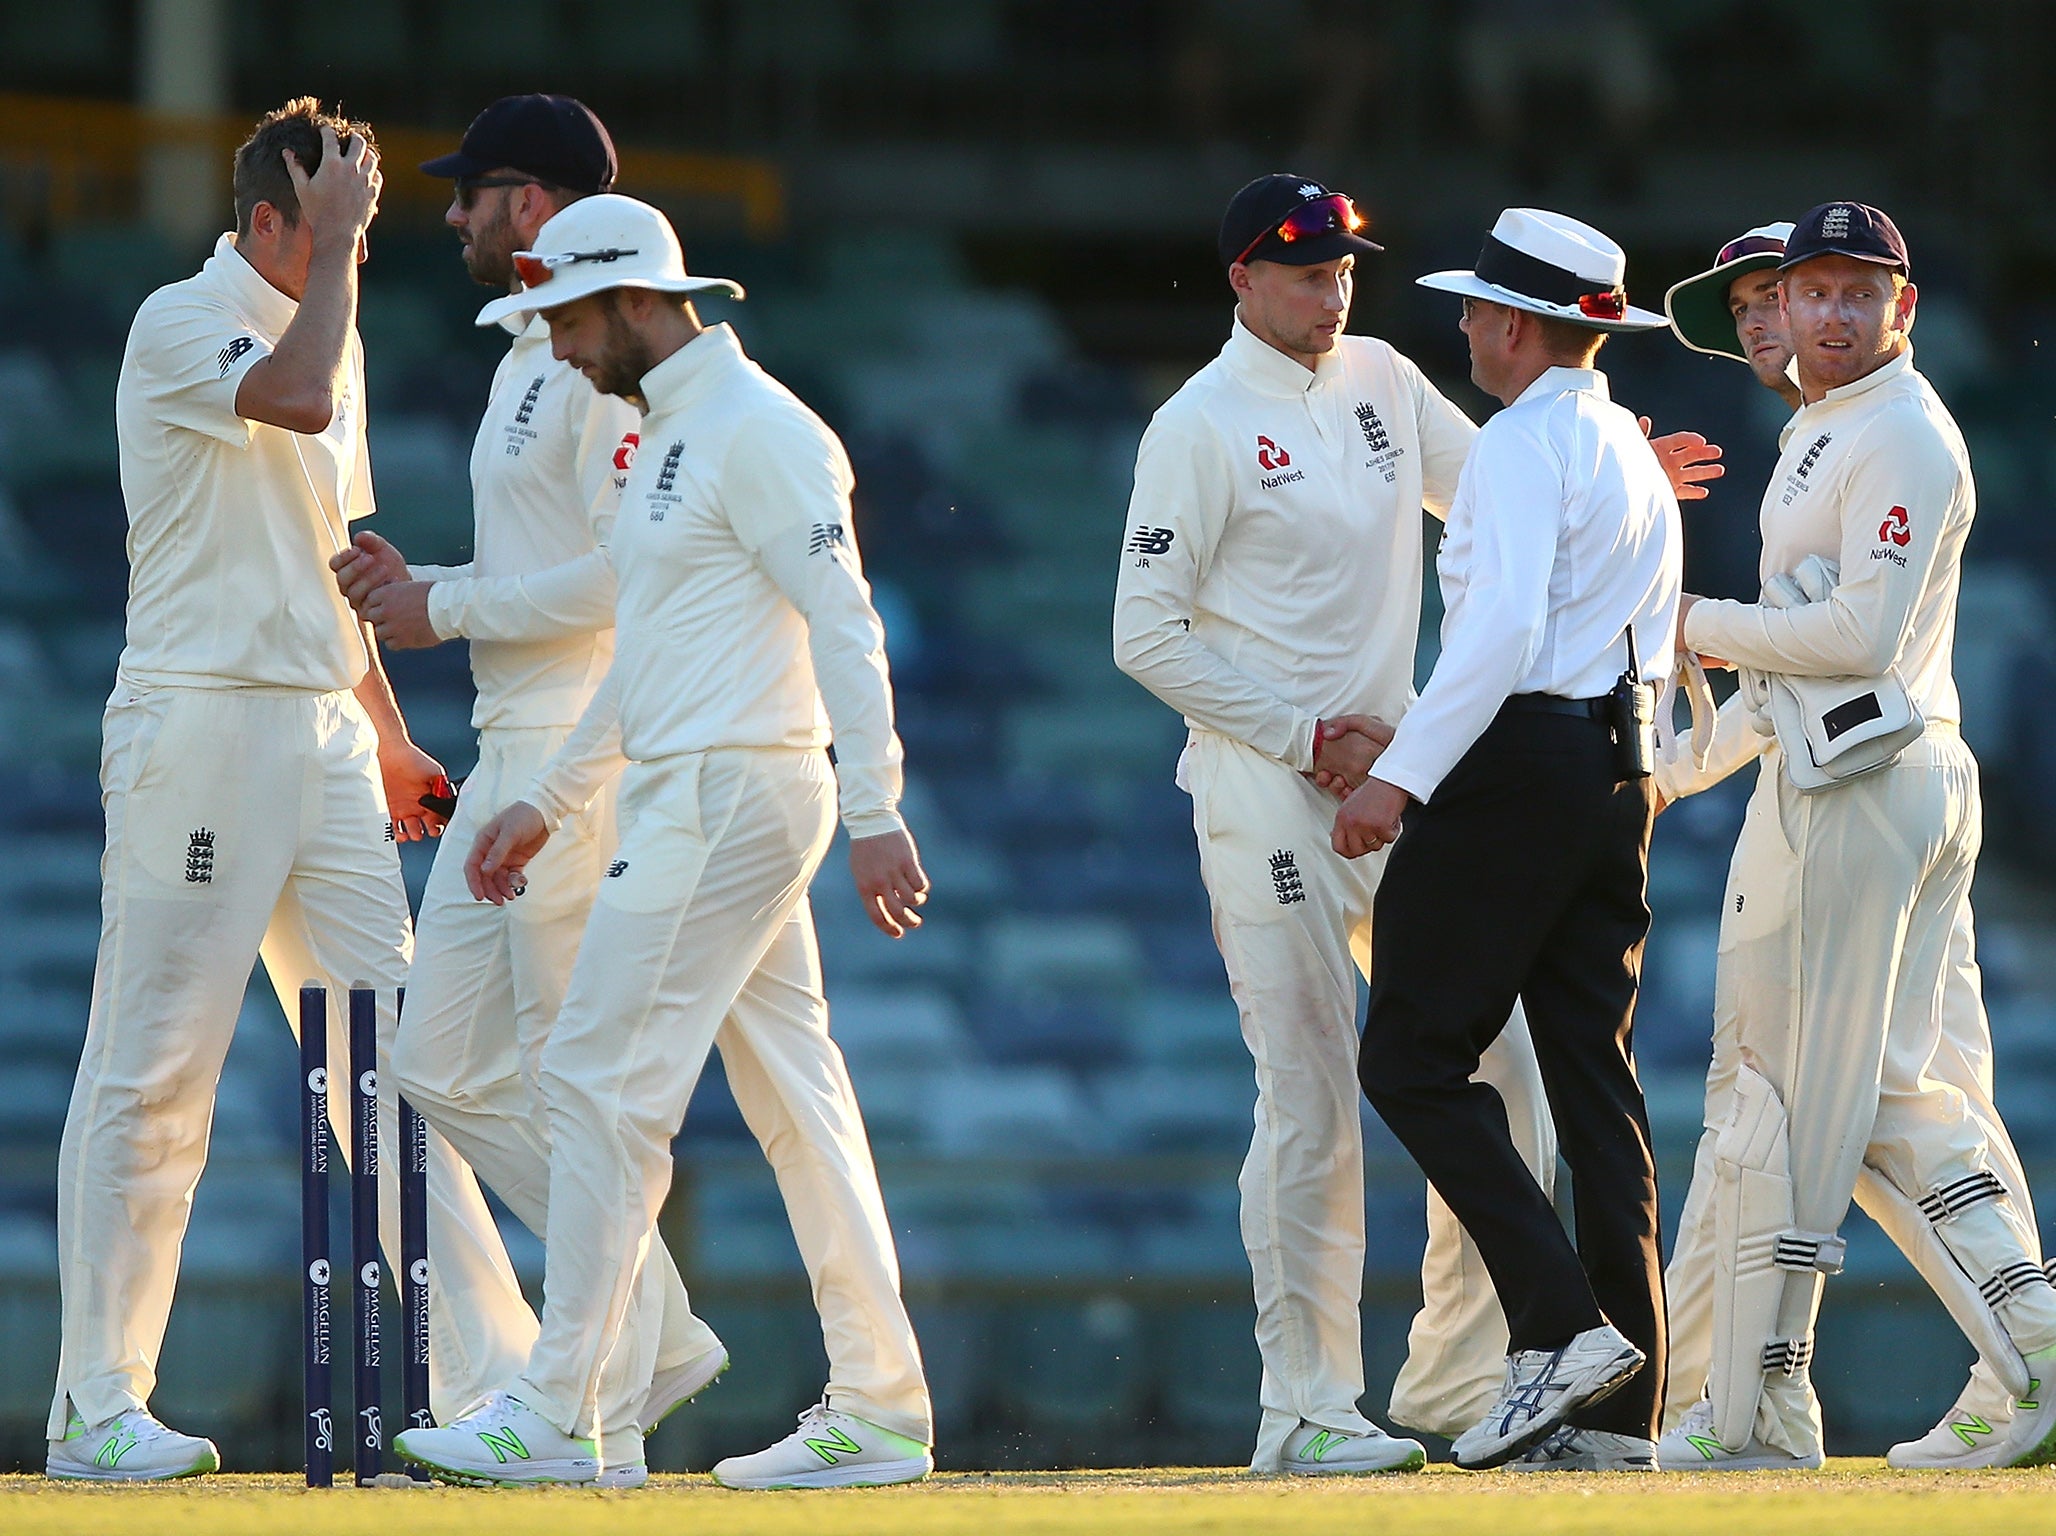 England's bowling attack failed to impress